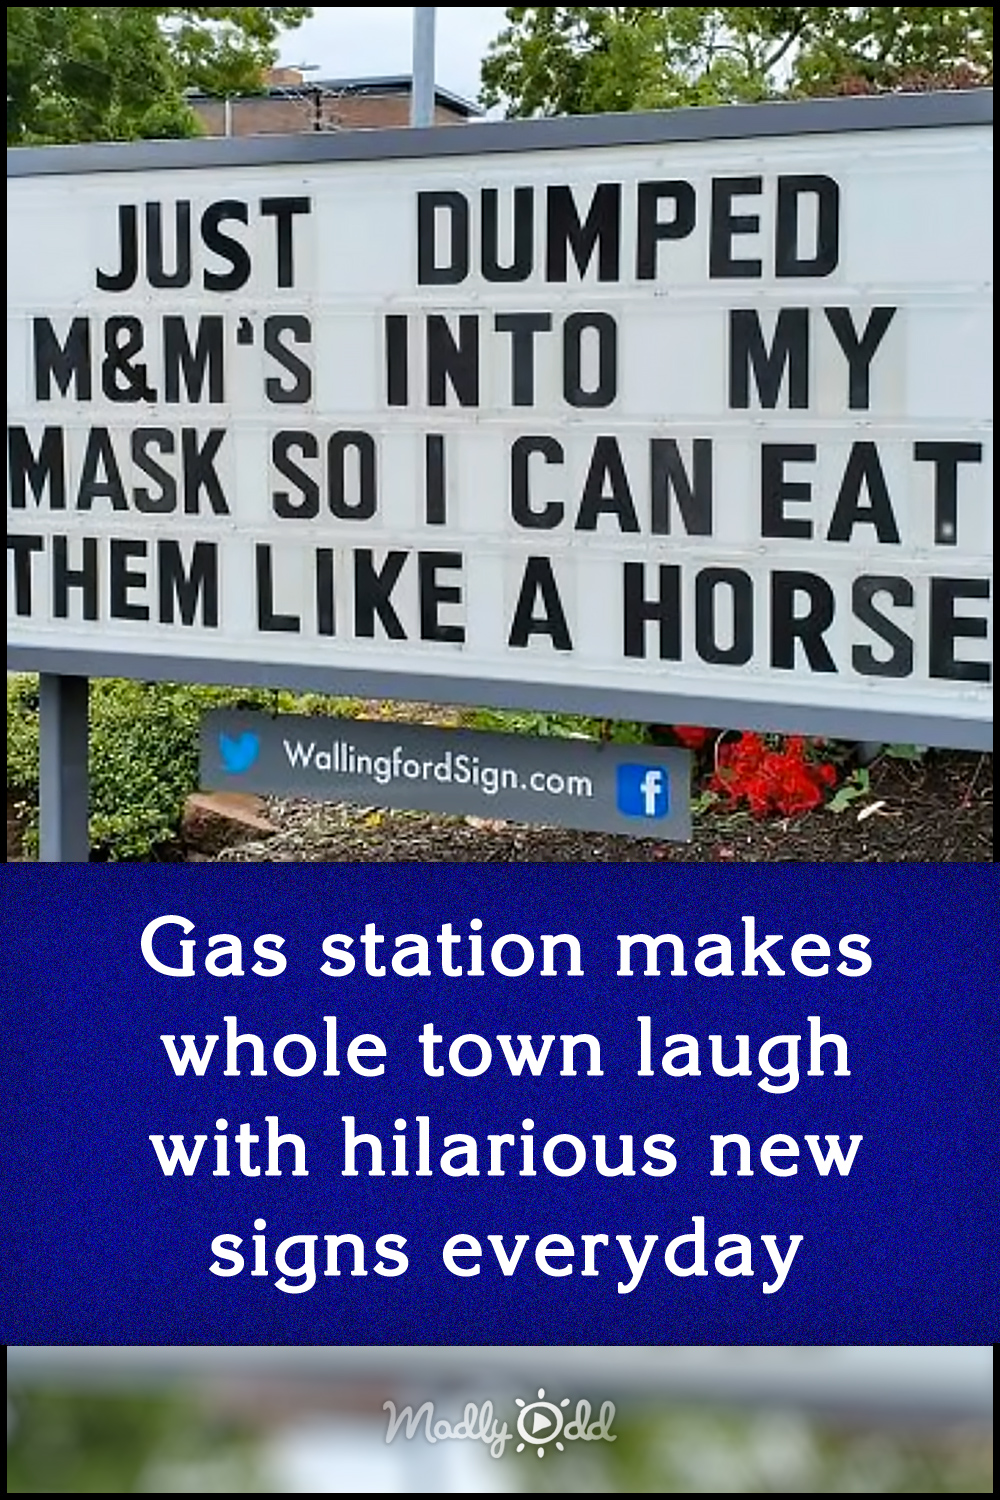 Gas station makes whole town laugh with hilarious new signs everyday